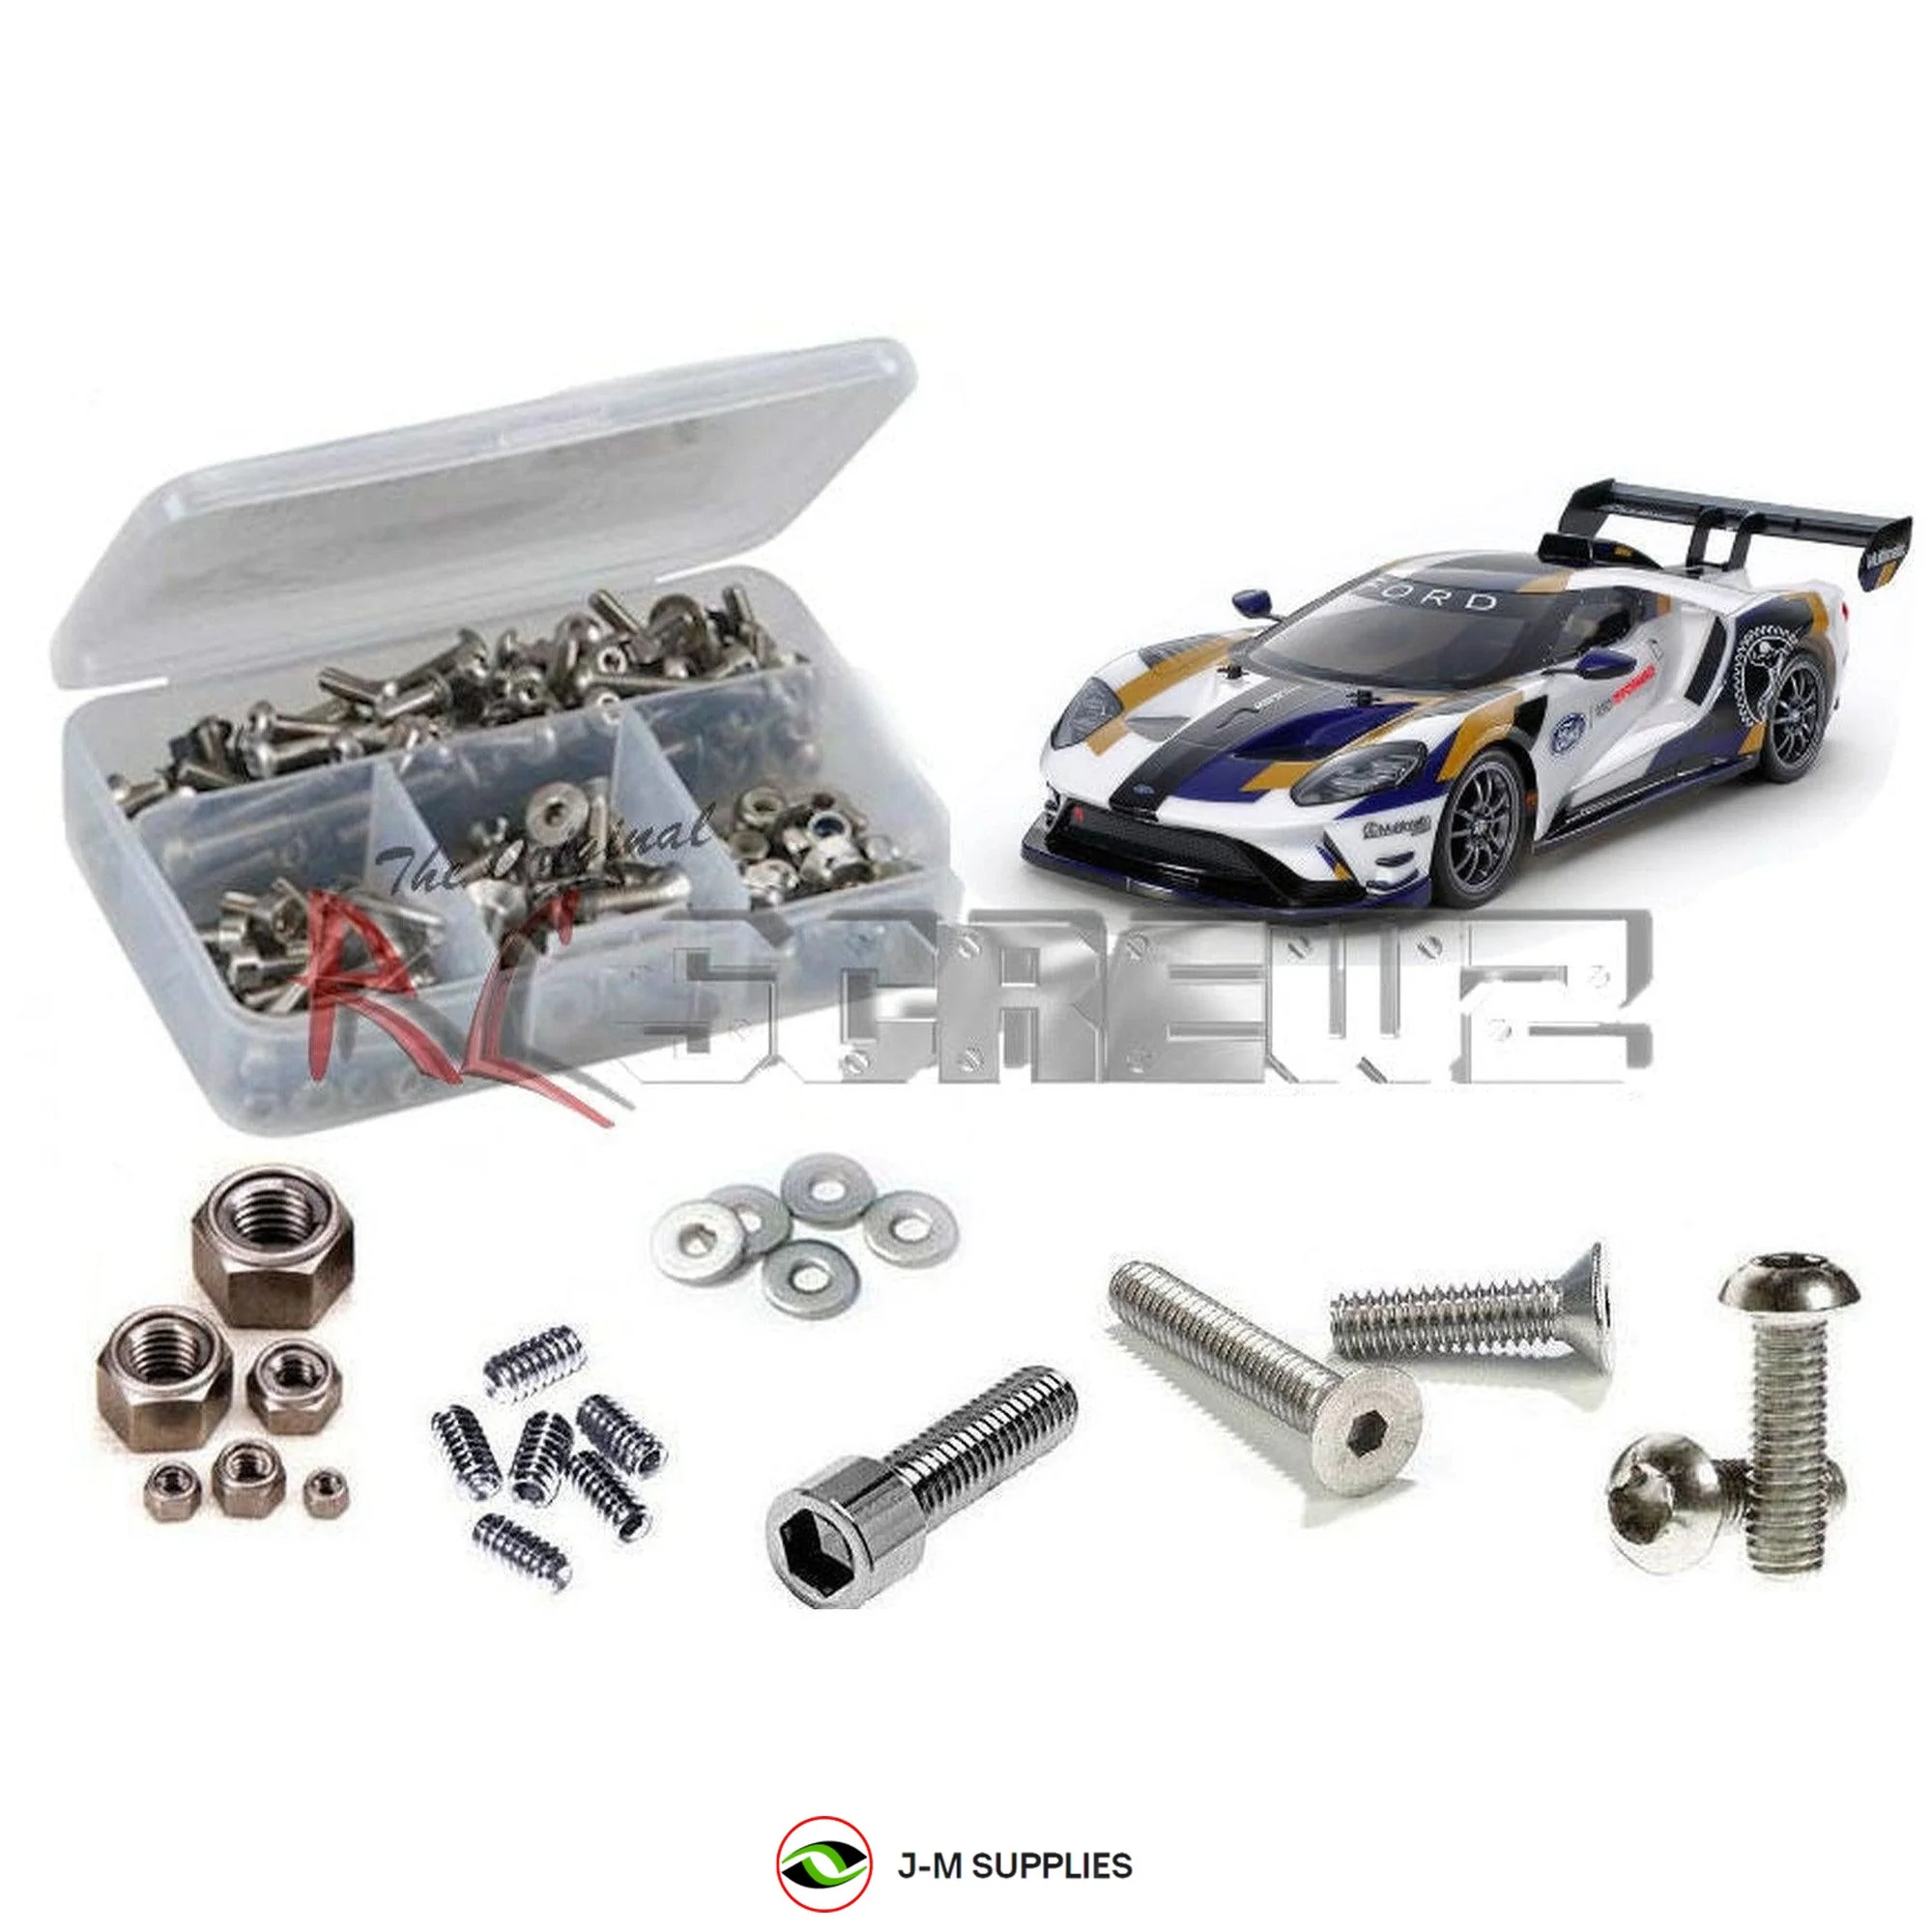 RCScrewZ Stainless Screw Kit tam251 for Tamiya TT-02 2020 Ford GT Mk II #58689 - Picture 1 of 12